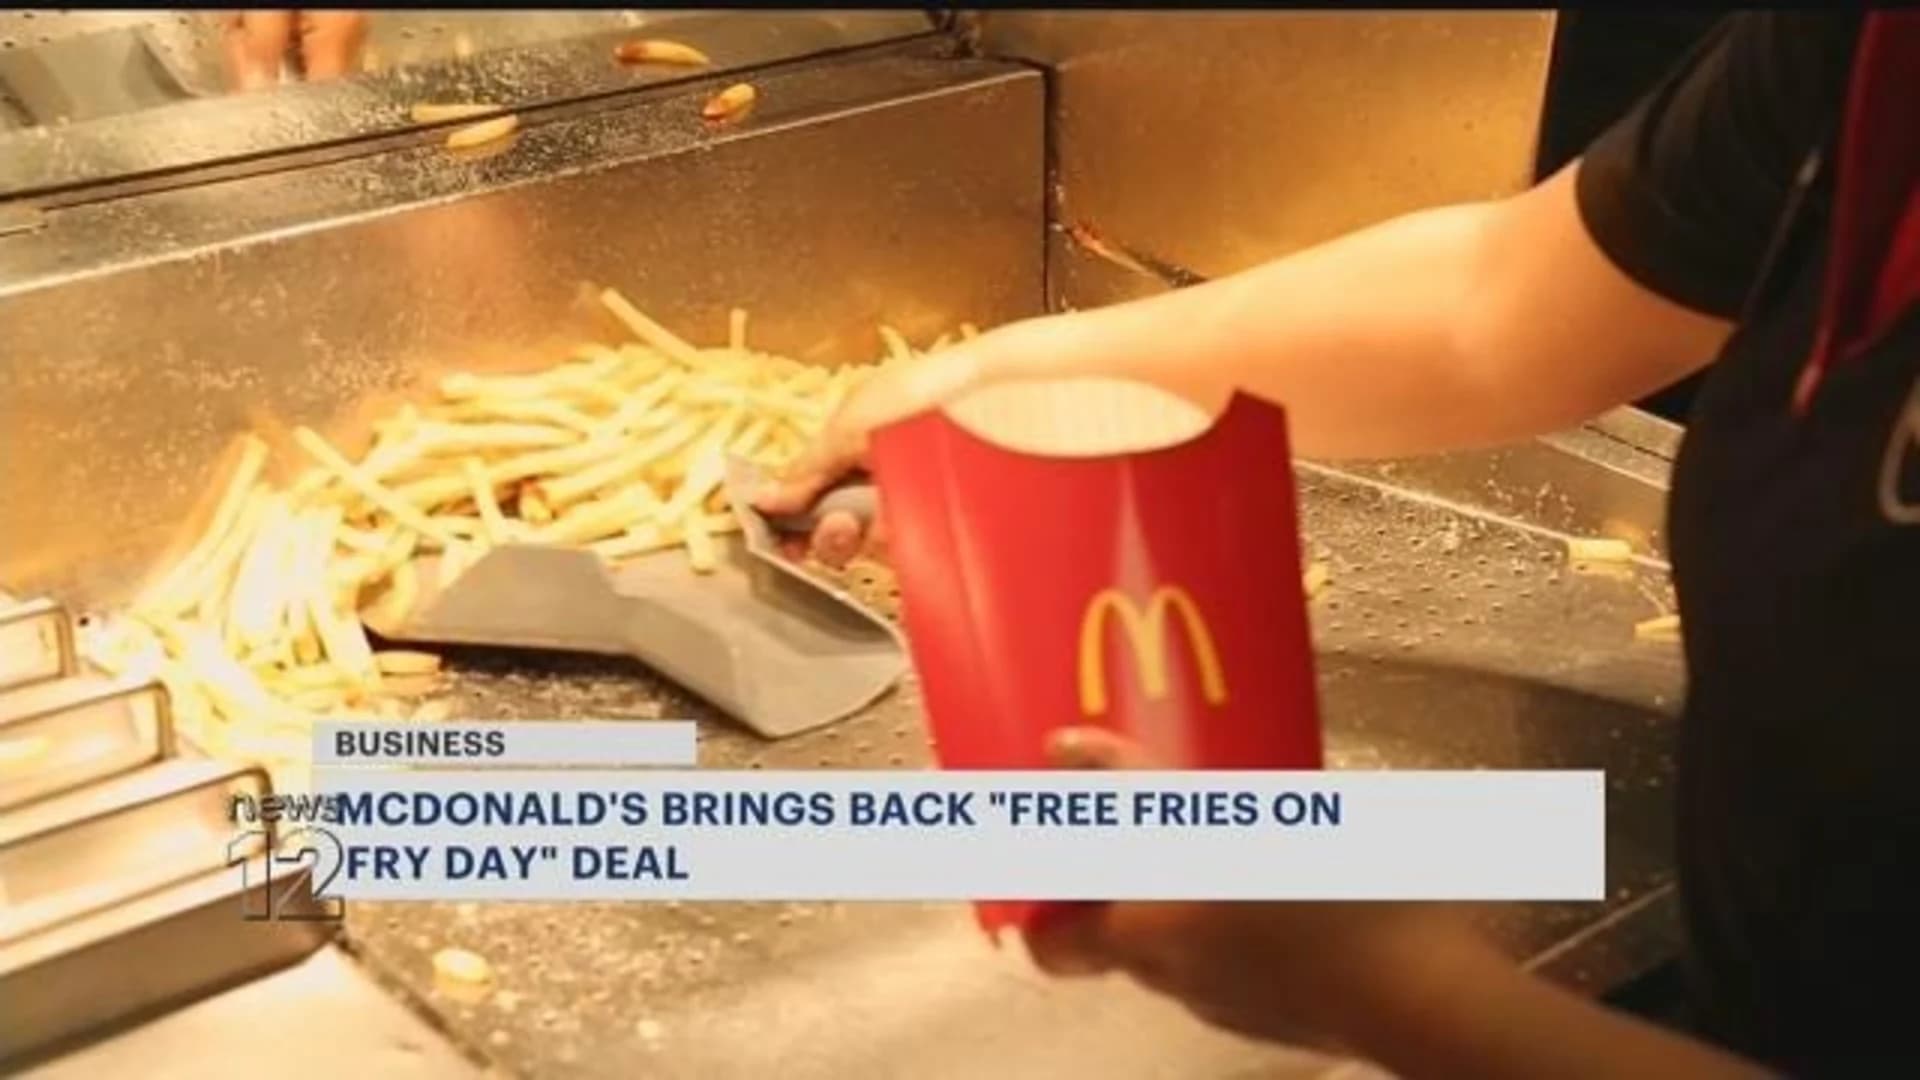 McDonald's brings back its "Free Fries on Fry Day" deal